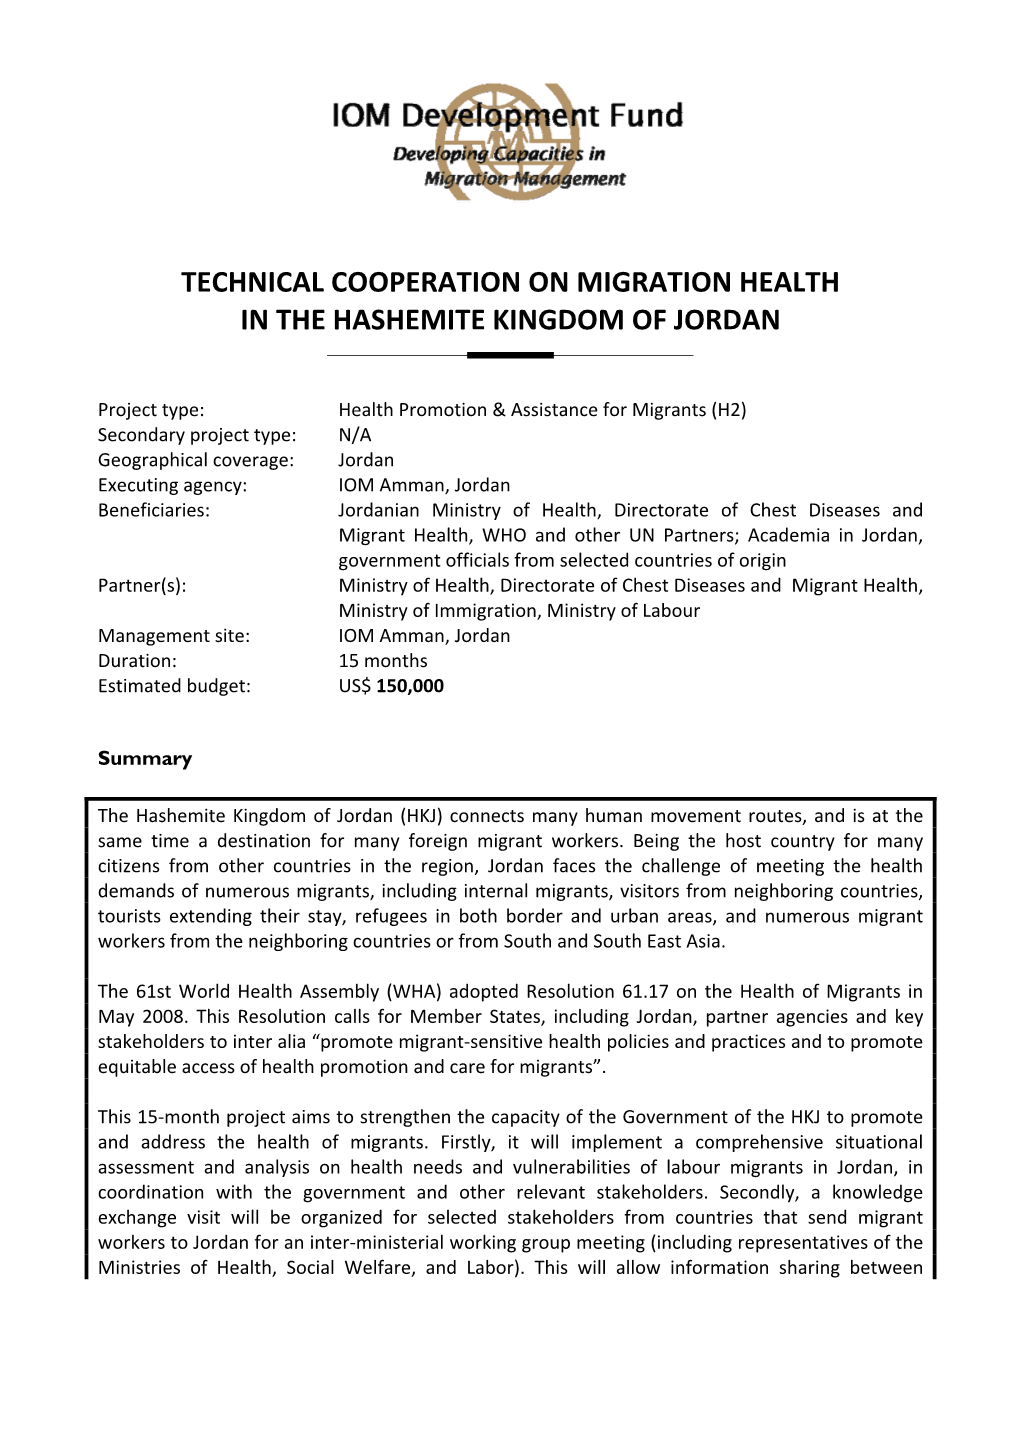 Technical Cooperation on Migration Health in the Hashemite Kingdom of Jordan